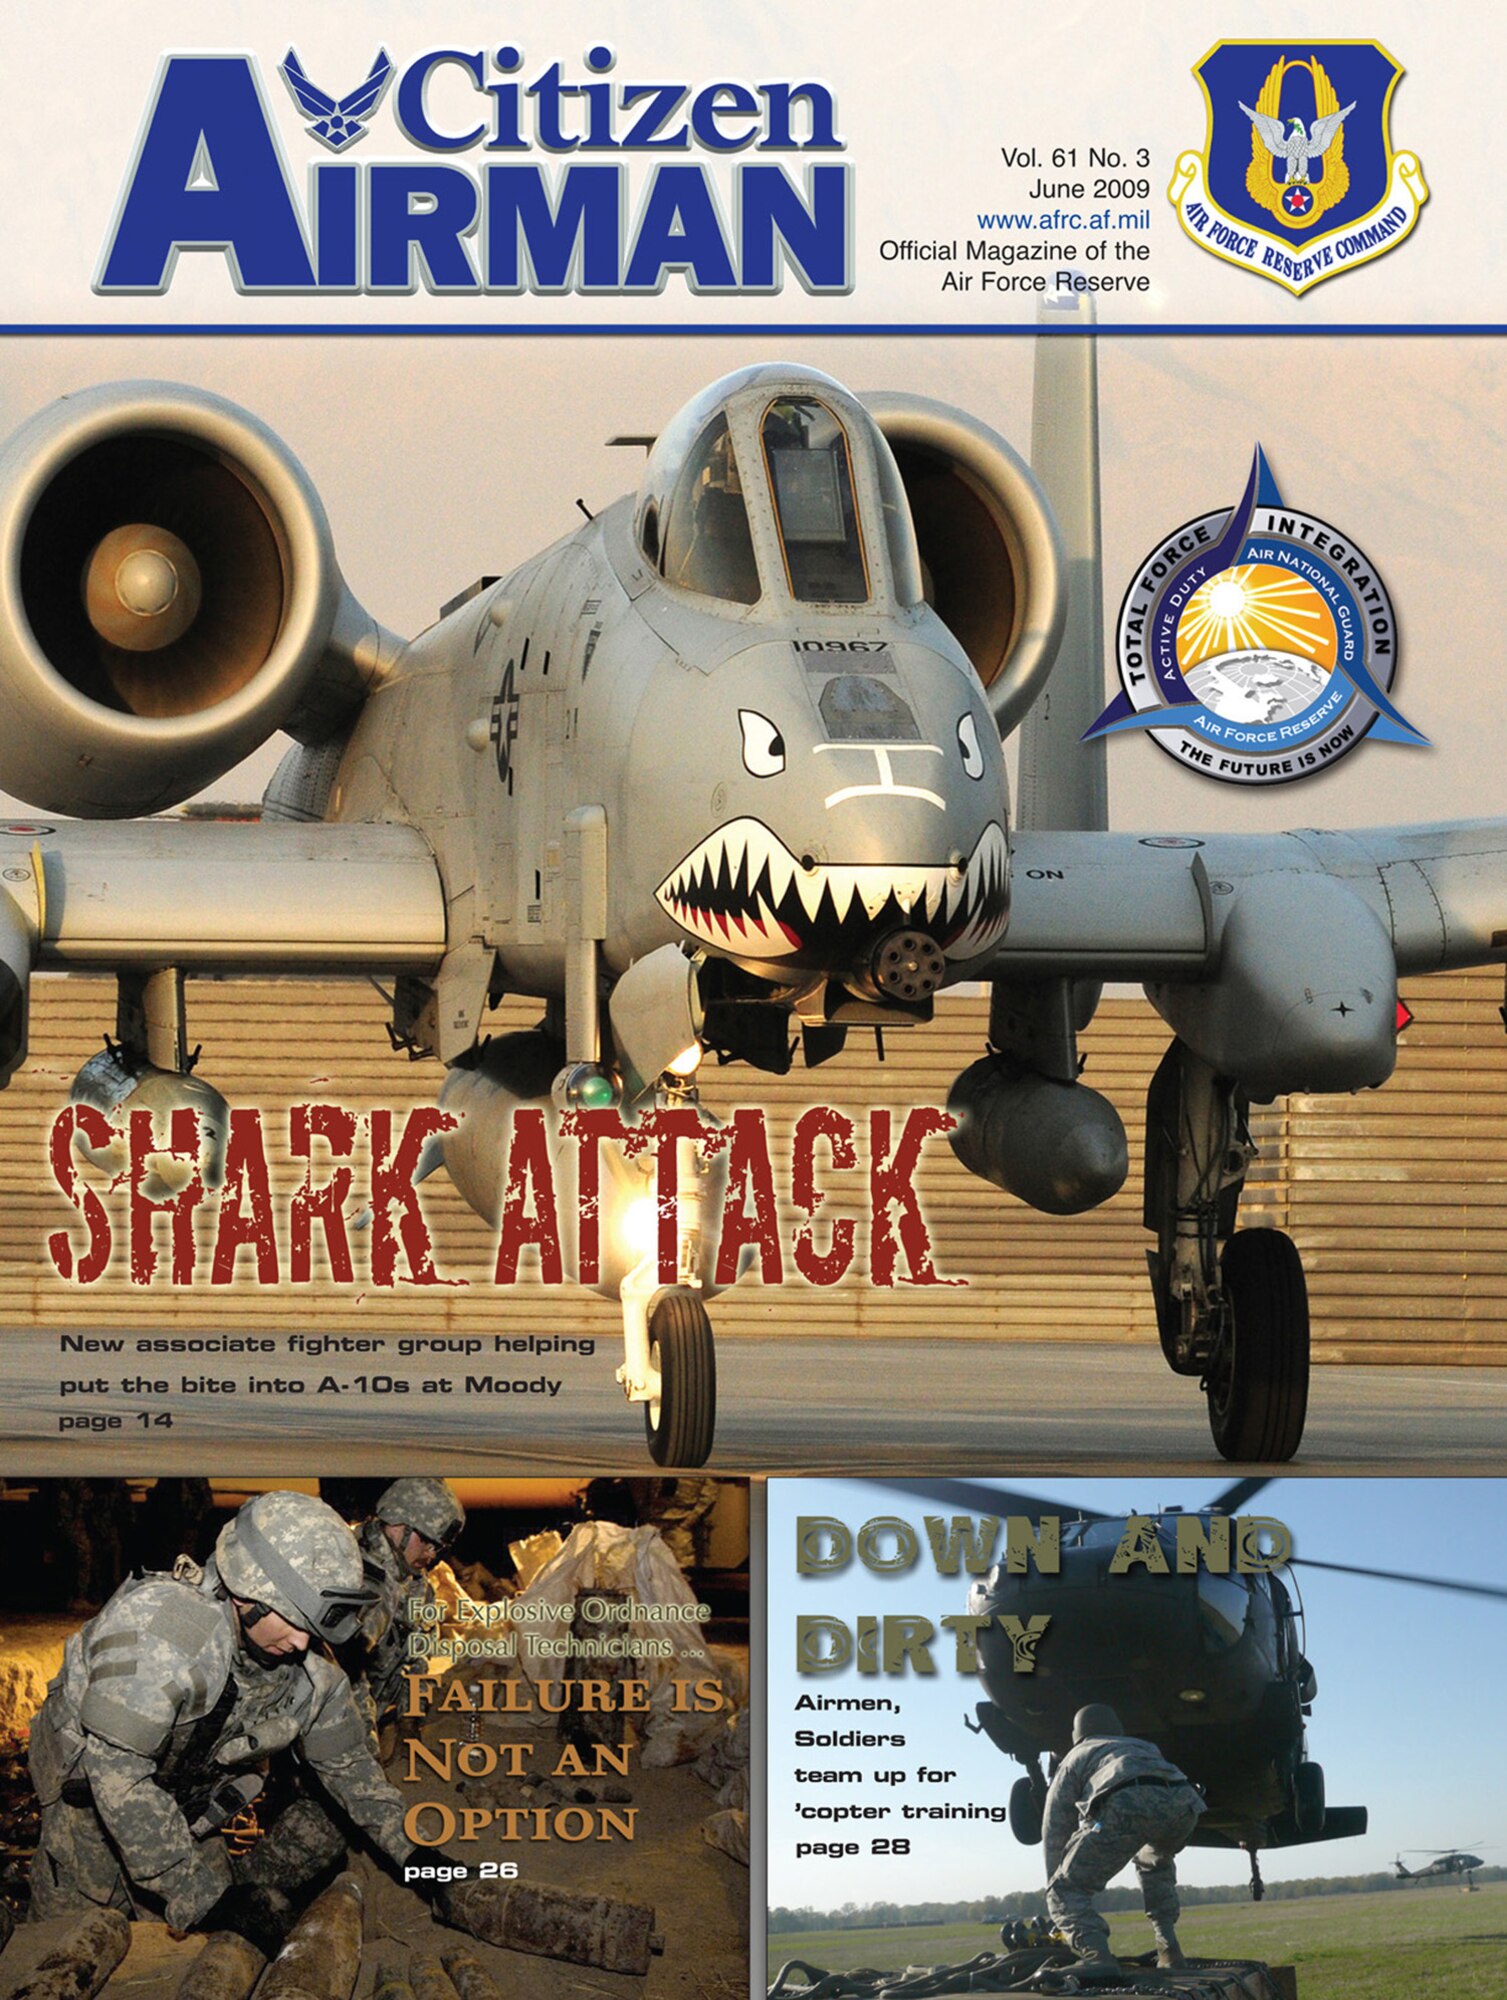 Look for these stories and more in the June issue of Citizen Airman Magazine: Shark Attack -- A new Reserve associate unit is teaming up with the world-famous Flying Tigers and their shark teeth-sporting A-10s at Moody Air Force Base, Ga.  Failure is Not an Option: Explosive ordnance disposal specialists destroy captured ordnance to prevent it from being used against coalition troops. Down and Dirty -- Airmen and Sailors team up for helicopter training near Maxwell AFB, Ala. 